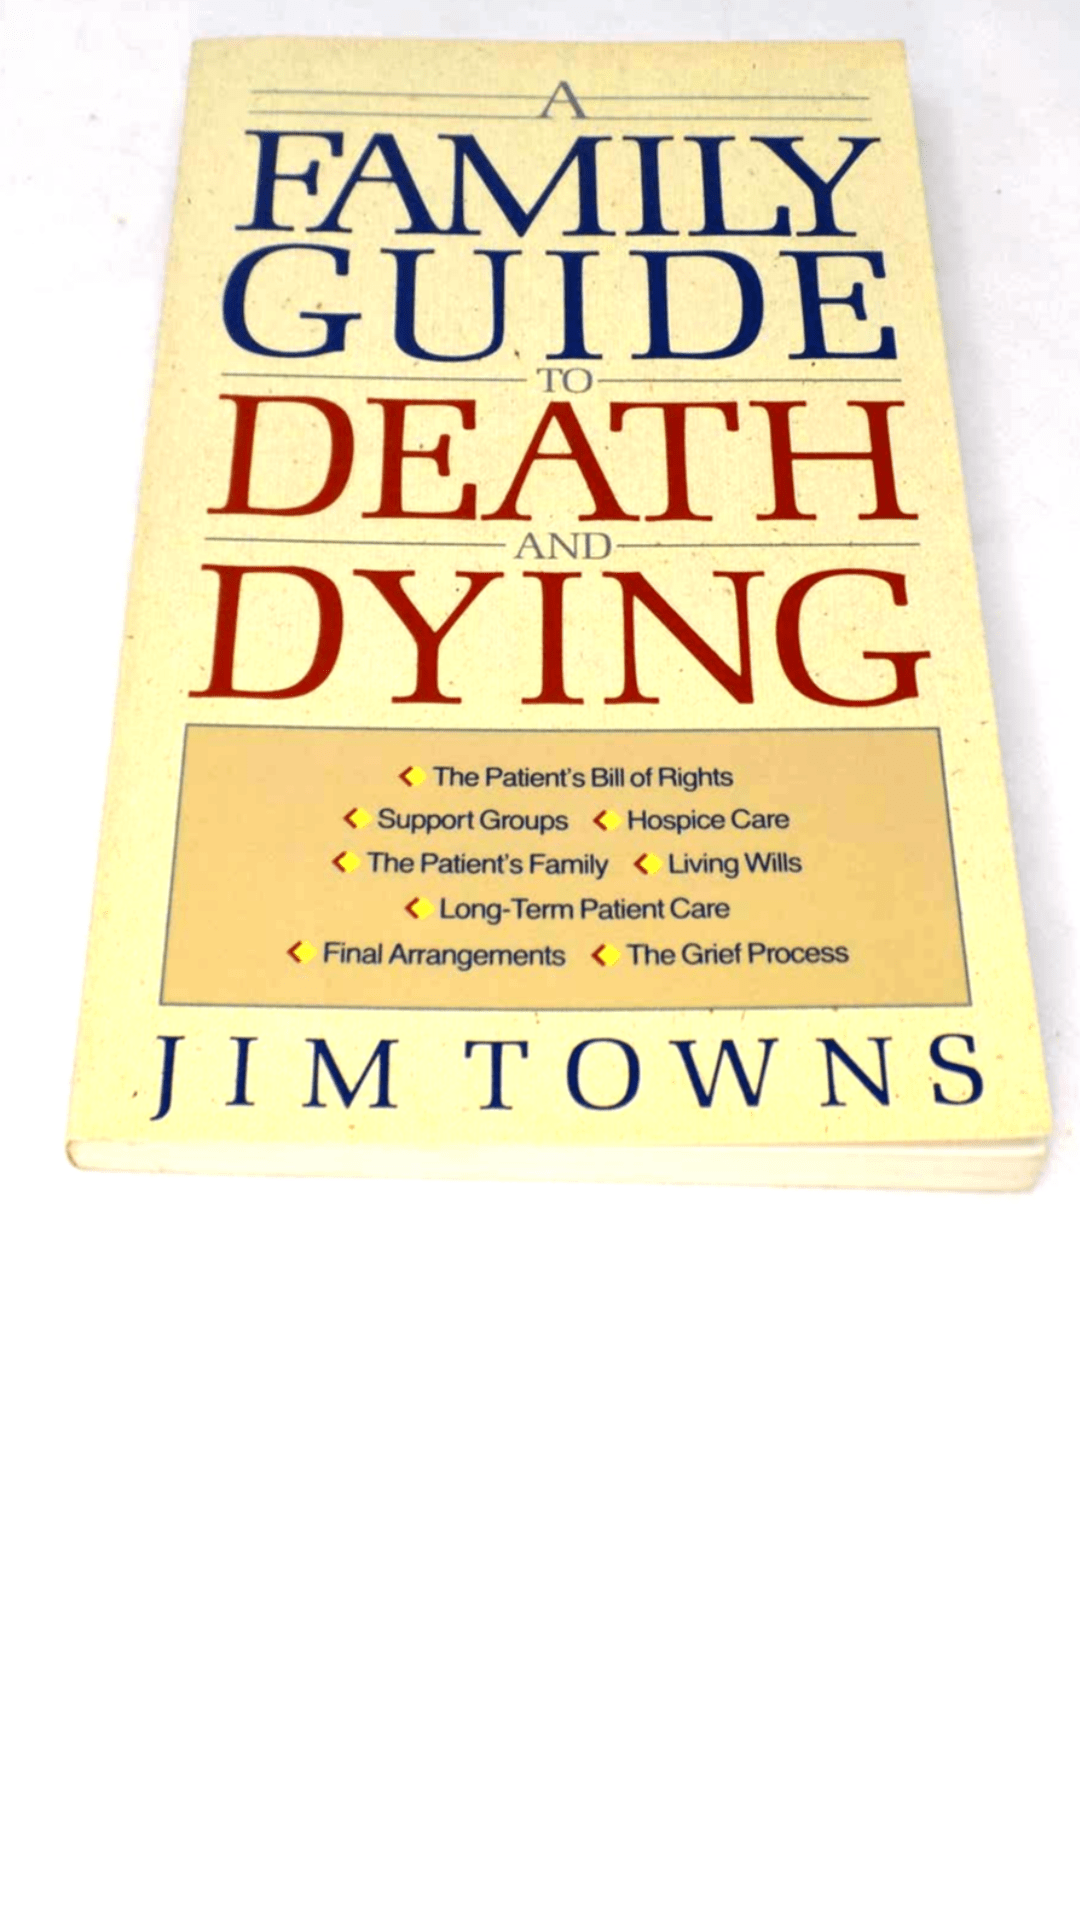 A Family Guide to Death and Dying